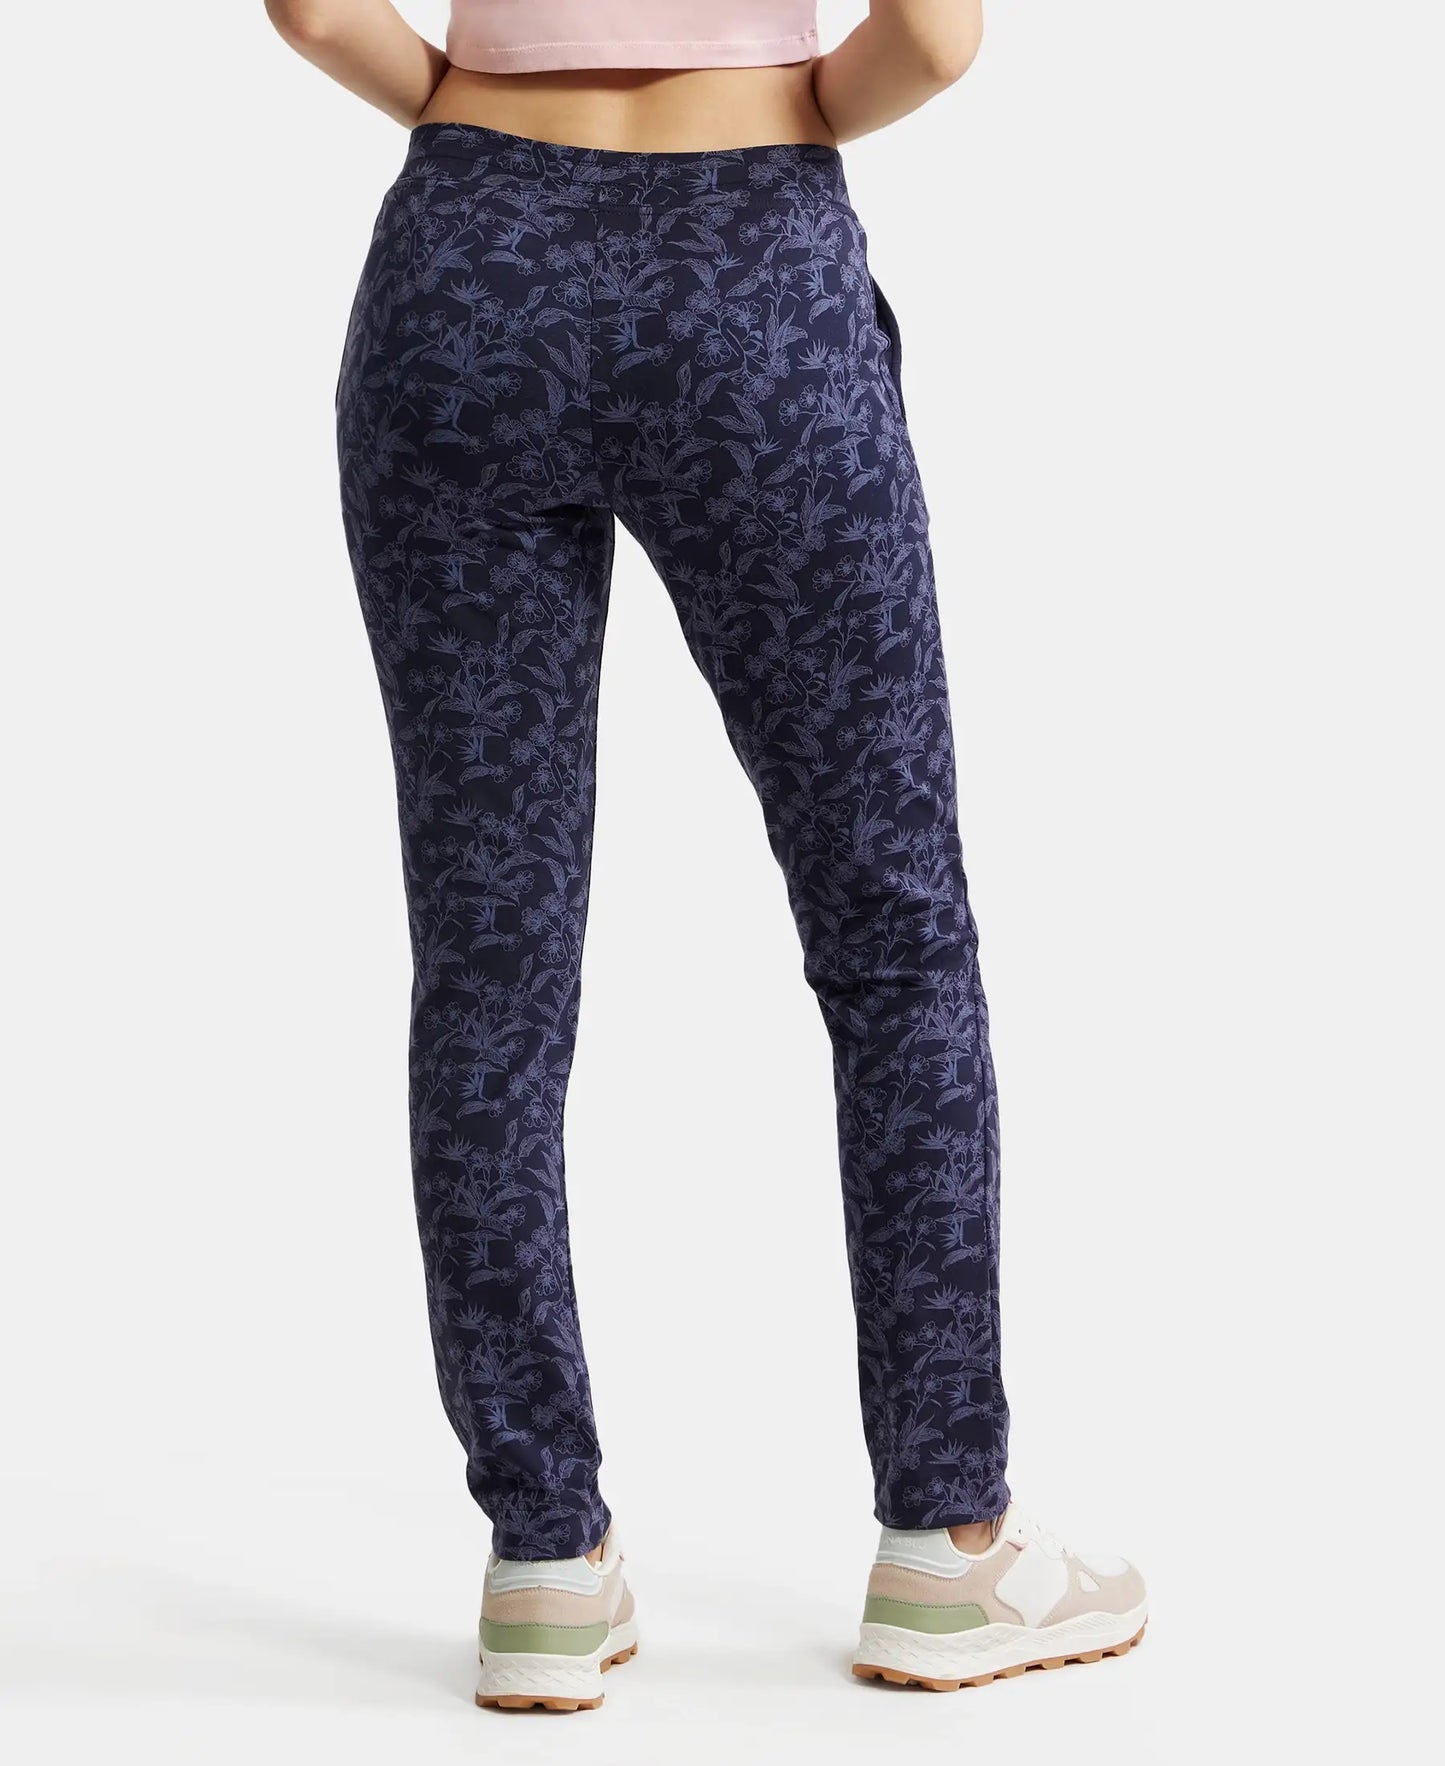 Super Combed Cotton Elastane Slim Fit Trackpants With Side Pockets - Navy Blazer Printed-3